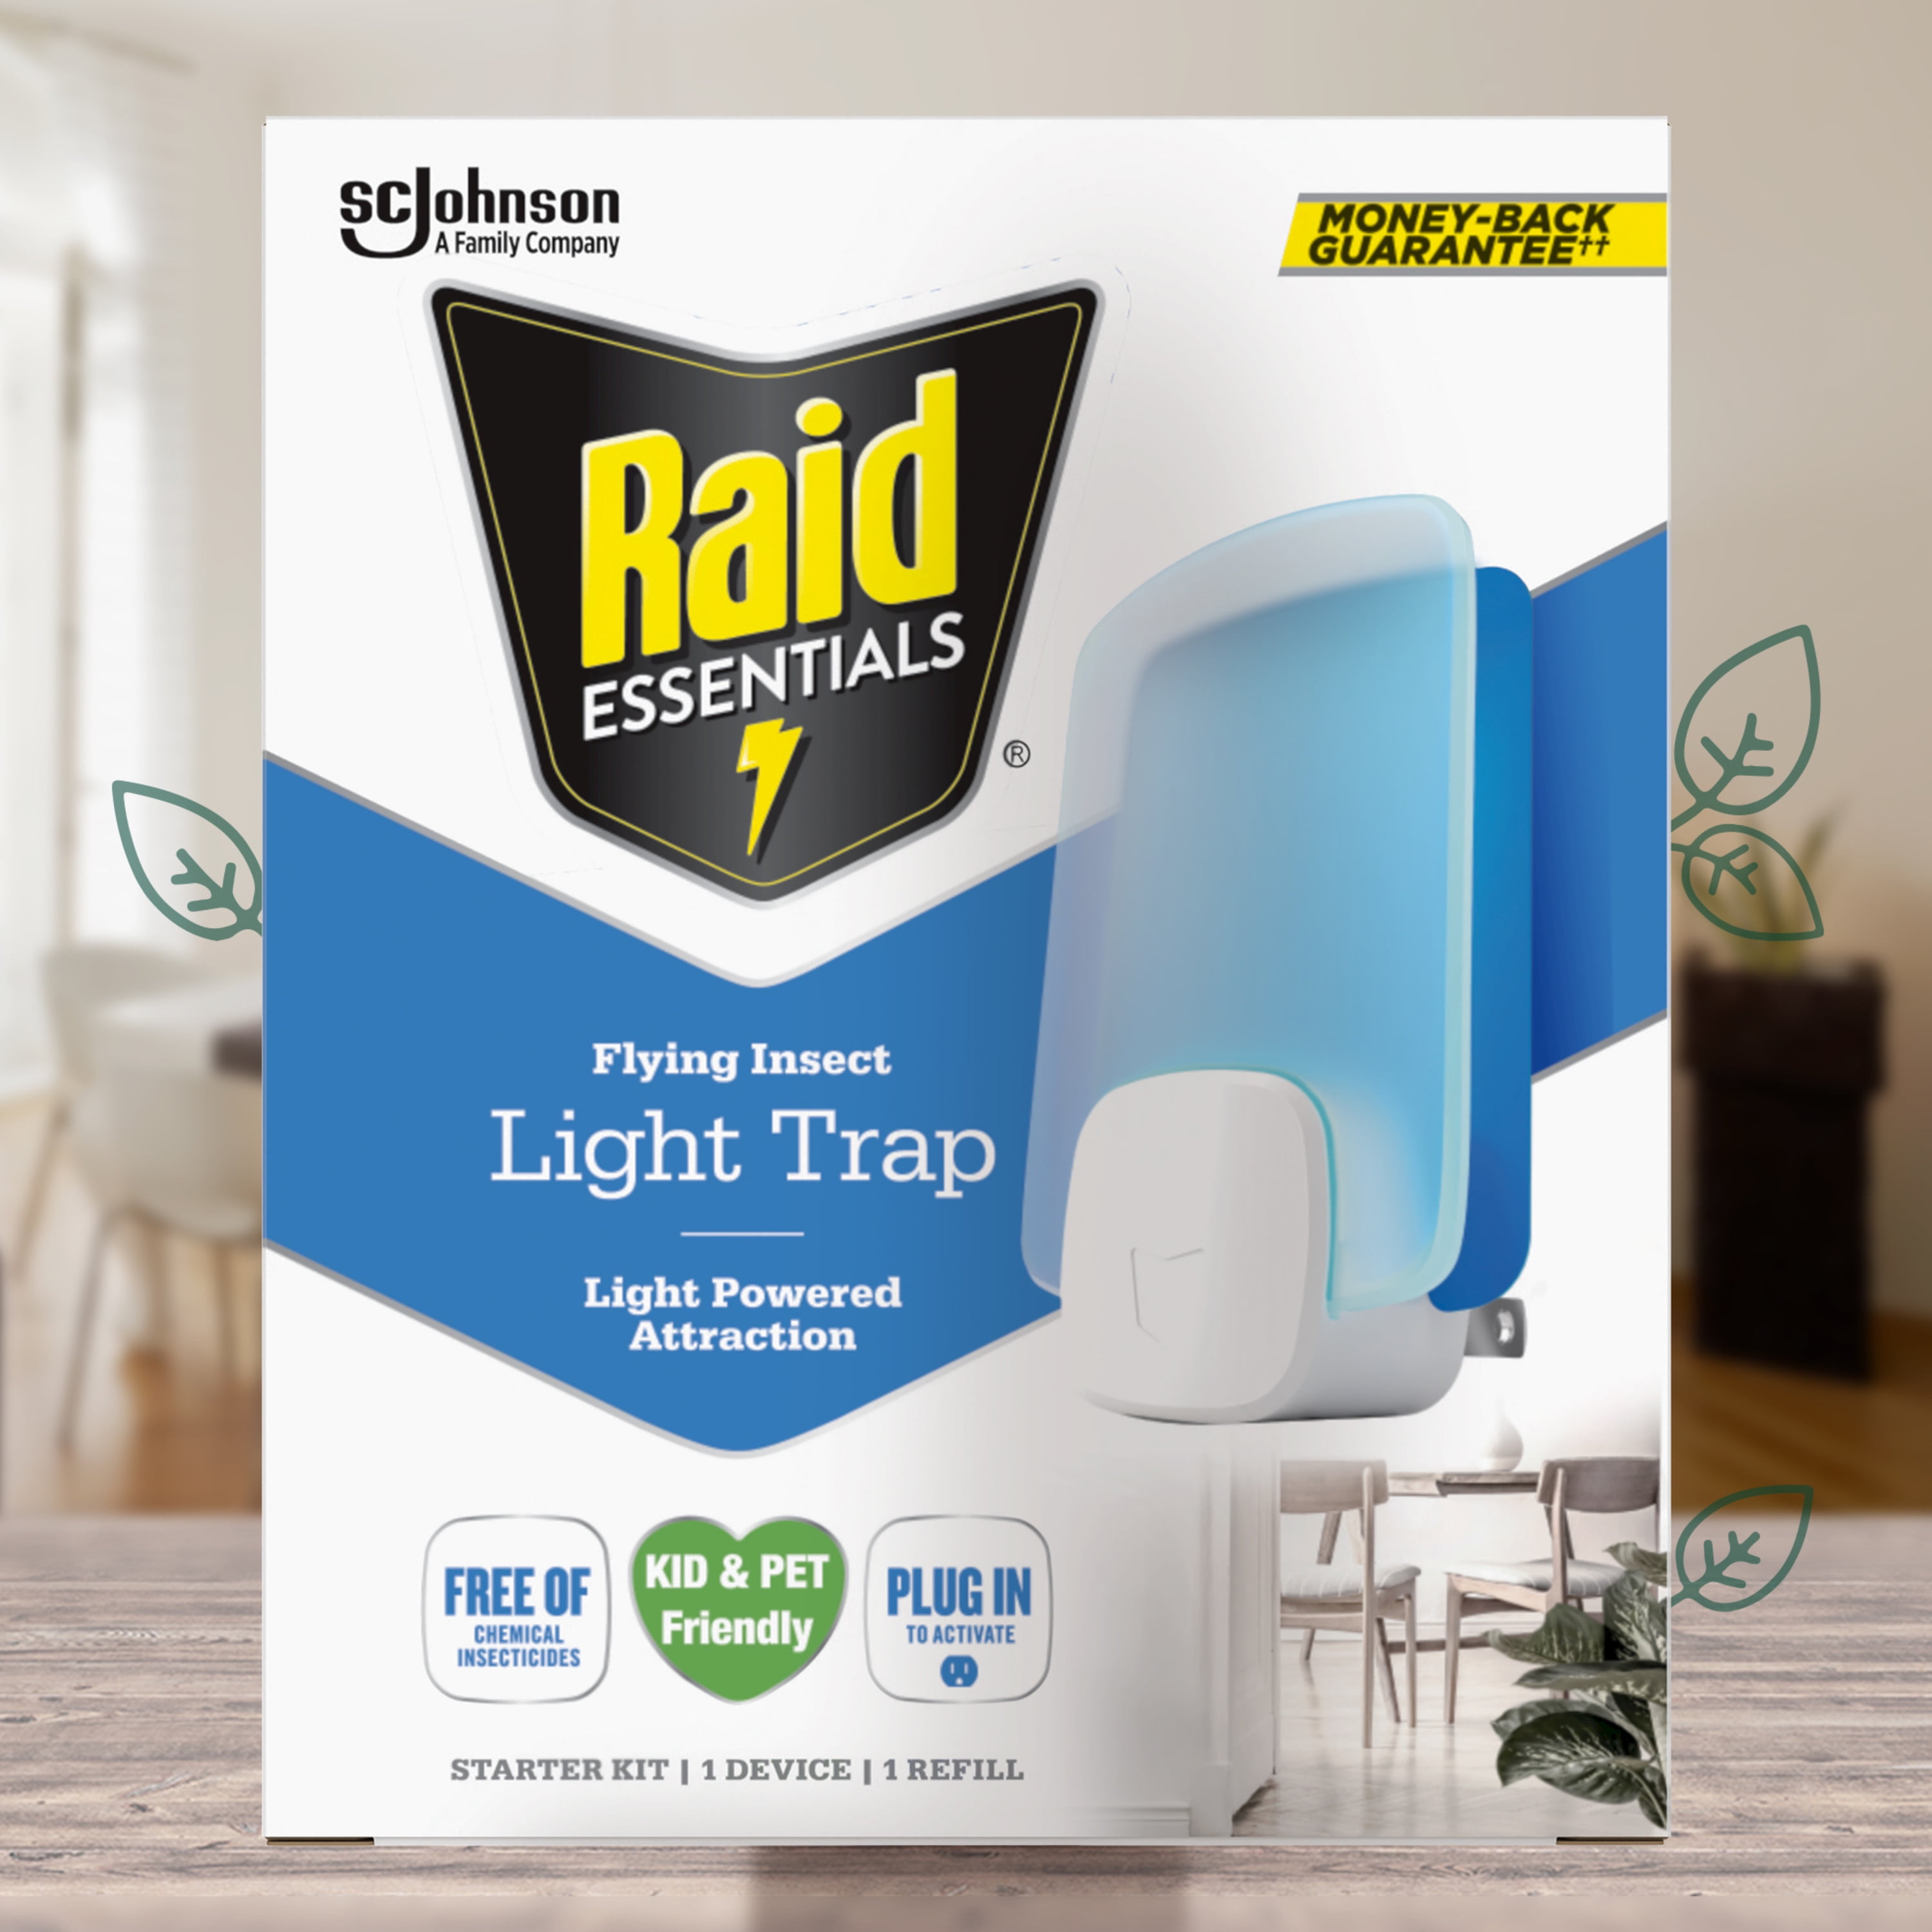 Reviews for Raid Window Discreet Indoor Fly Trap (2-Pack/Case) (Total  Number of Traps - 24)